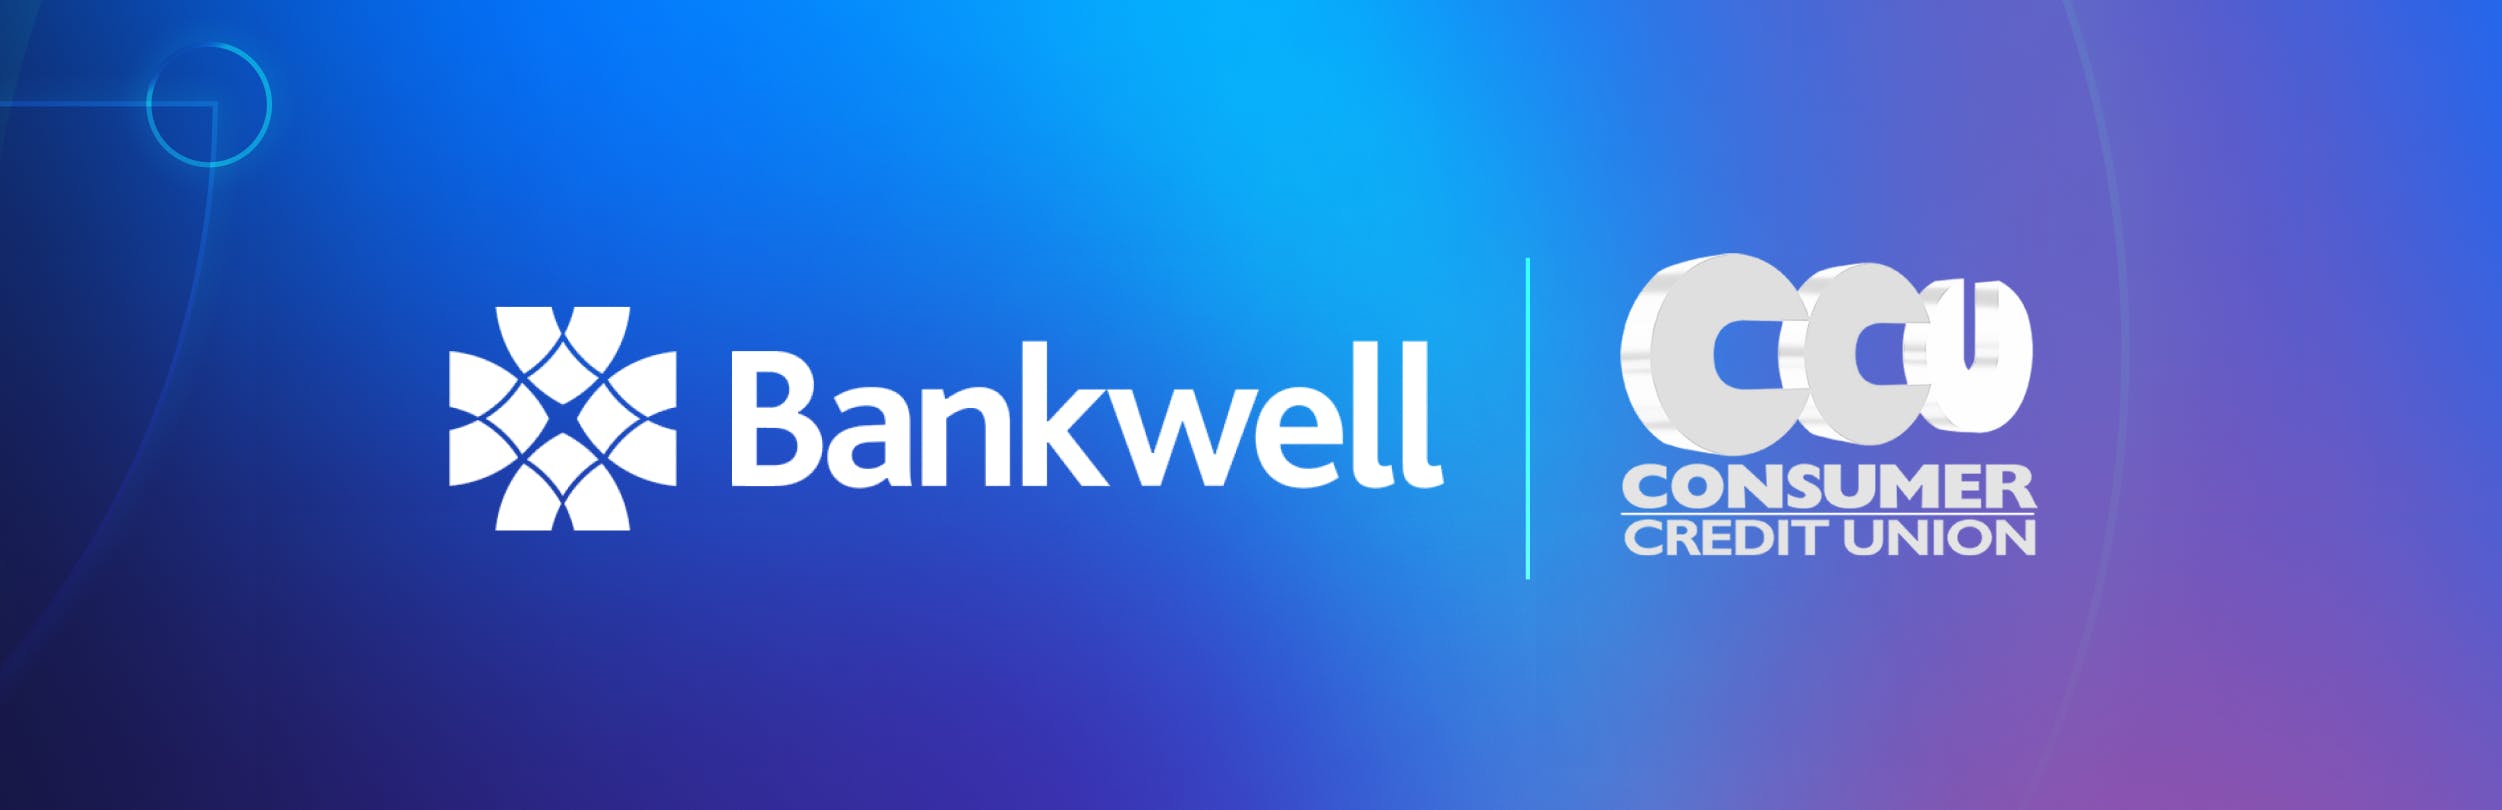 New Client Spotlight: Bankwell and Consumer Credit Union